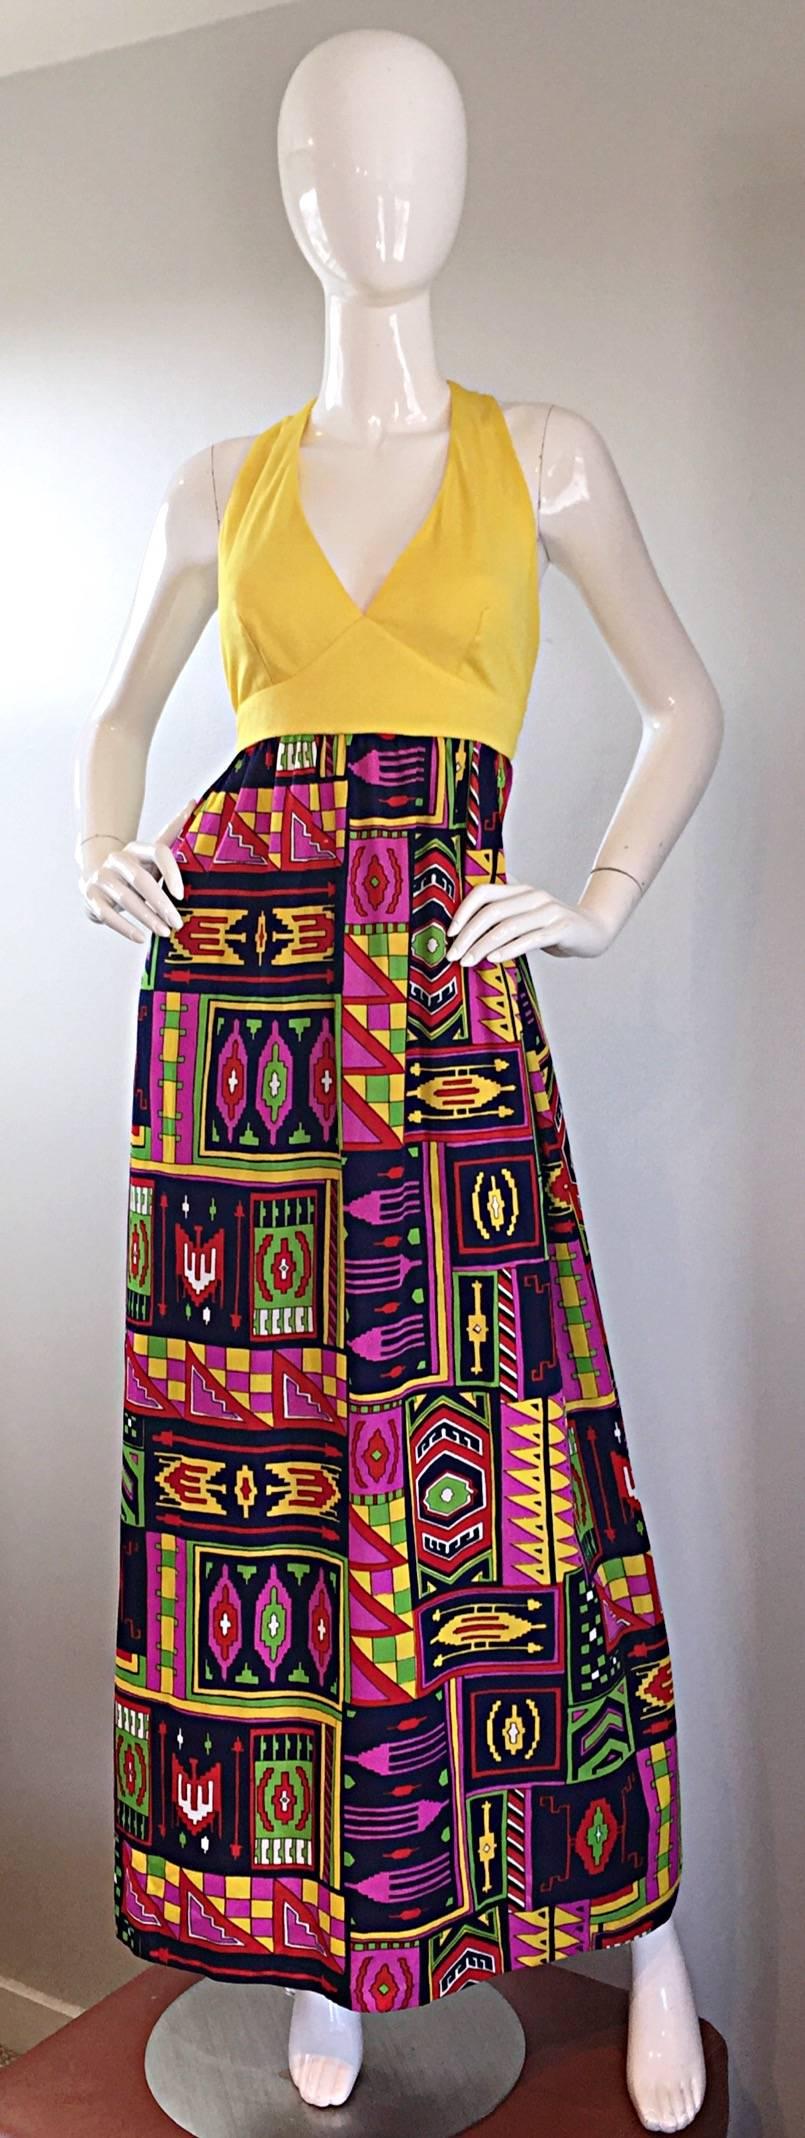 Incredible 70s KELLY ARDEN maxi dress and fringed shawl! Dress features a 'caged' back, with two gold buttons at top back neck. Halter style. Full skirt features bright colors in an abstract 'Southwestern' print. Full zipper up the back, with